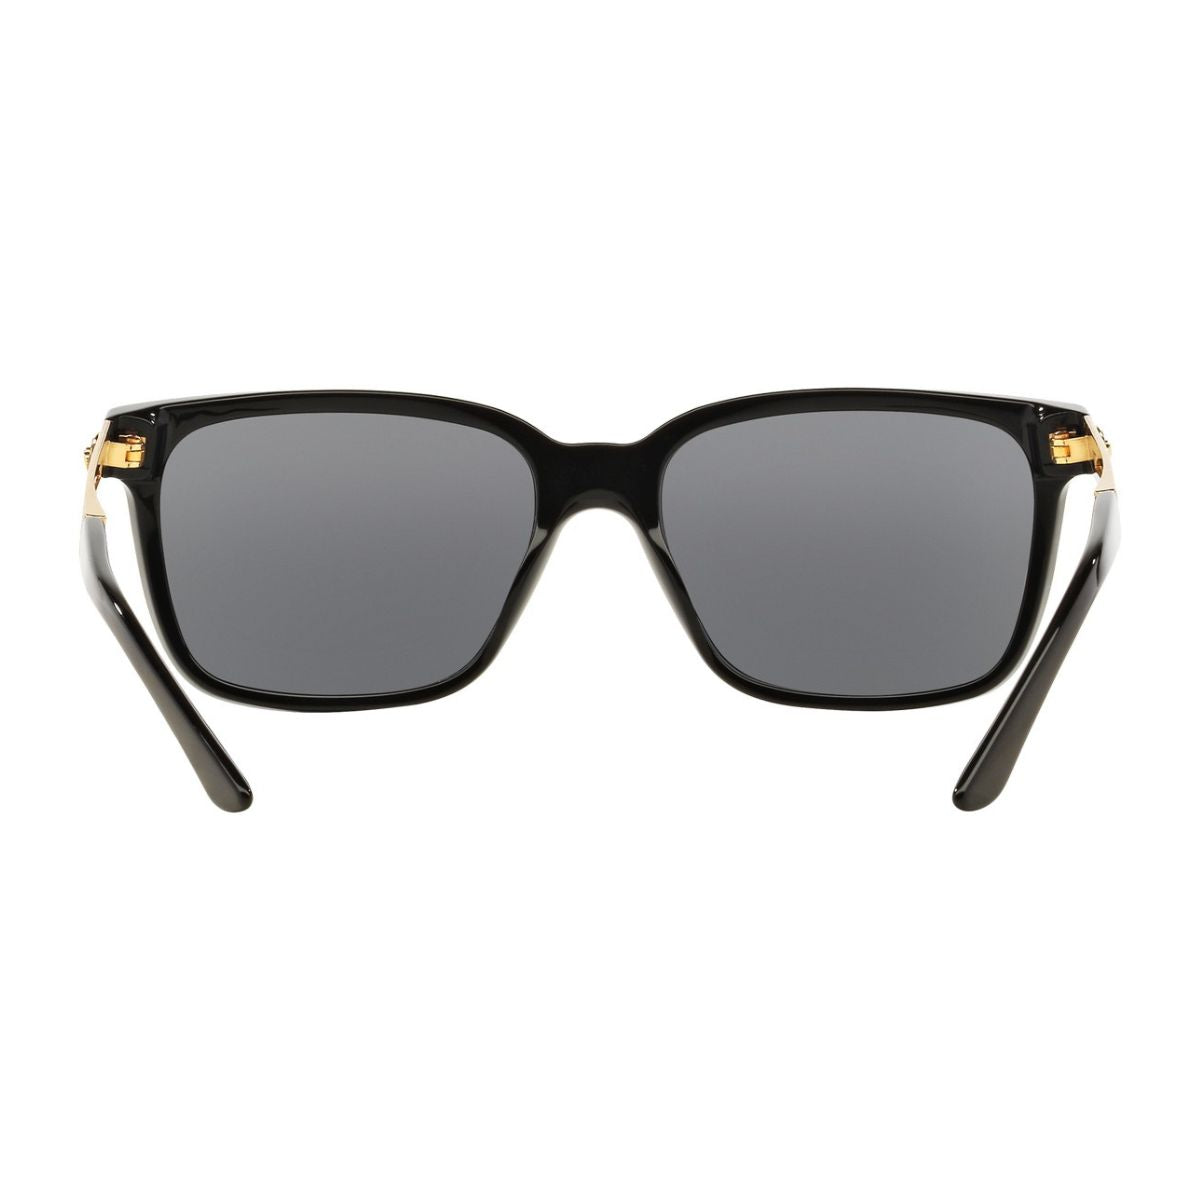 " Shop the trendy Versace 4307 GB1/87 sunglasses in black and gold at Optorium. A must-have accessory for style and function"